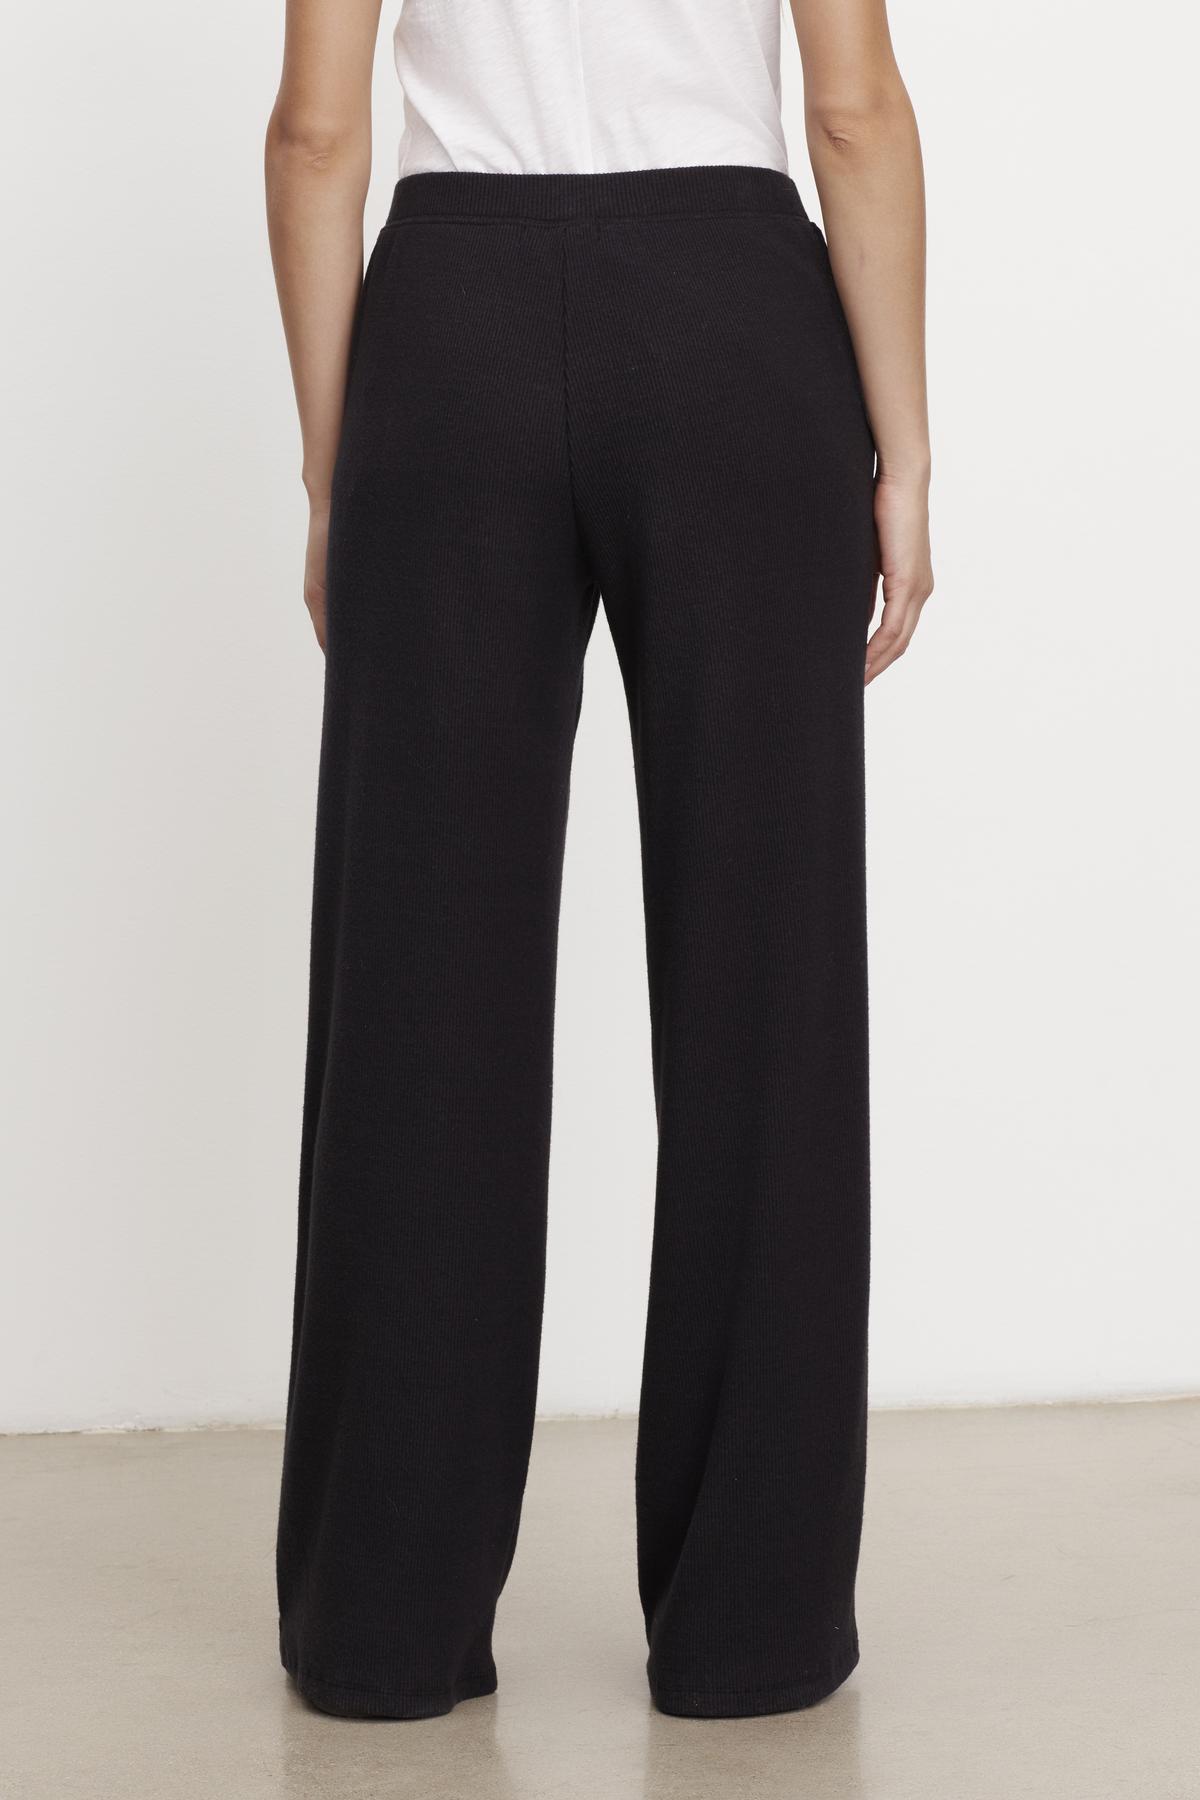   The back view of a person wearing Velvet by Graham & Spencer's KACIE BRUSHED RIB PANT. 